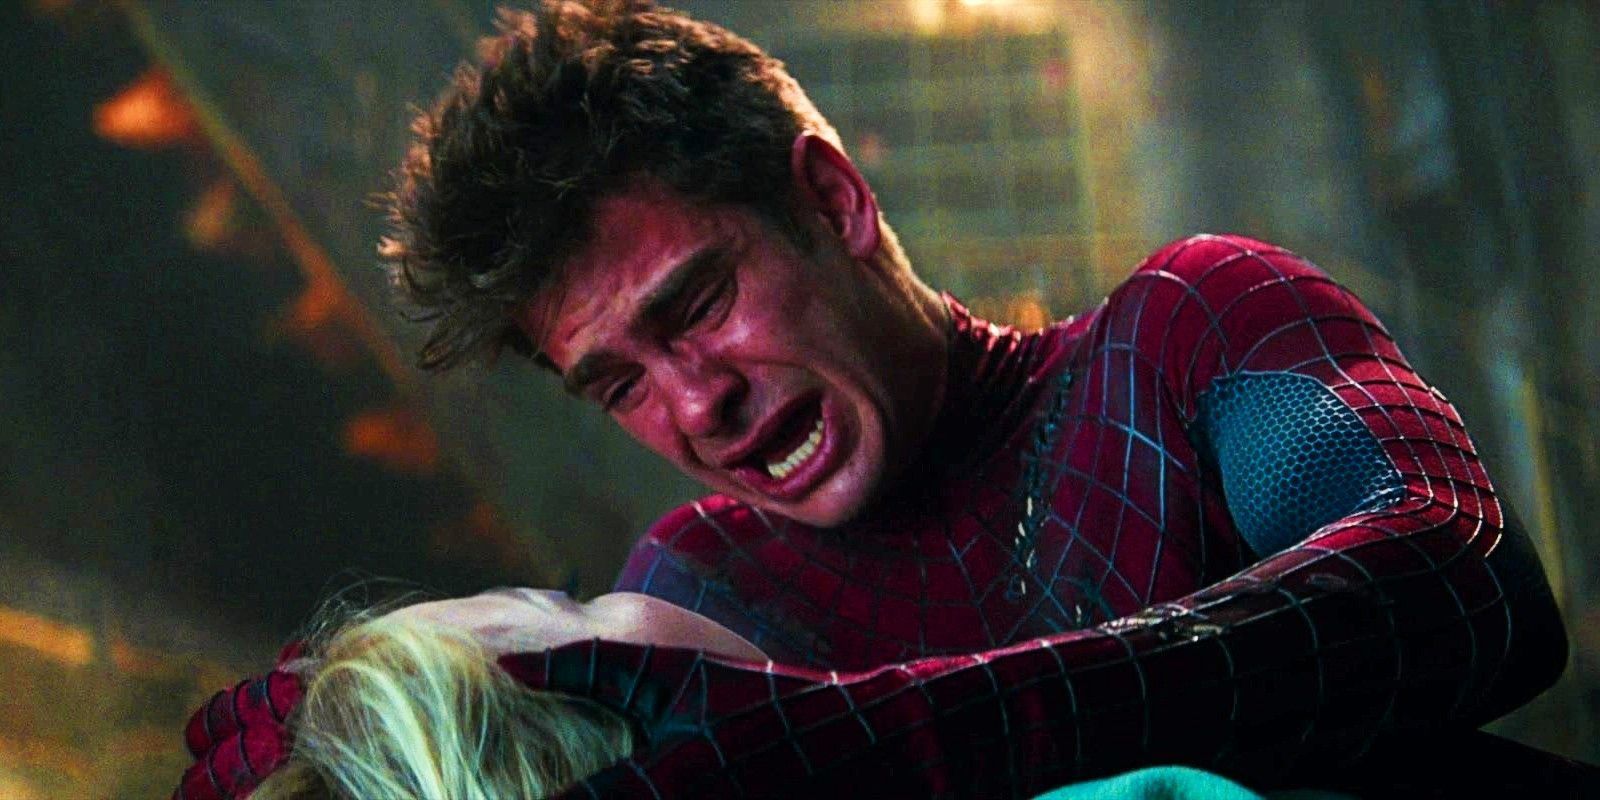 Spider-Man holds Gwen Stacy's body in The Amazing Spider-Man 2.